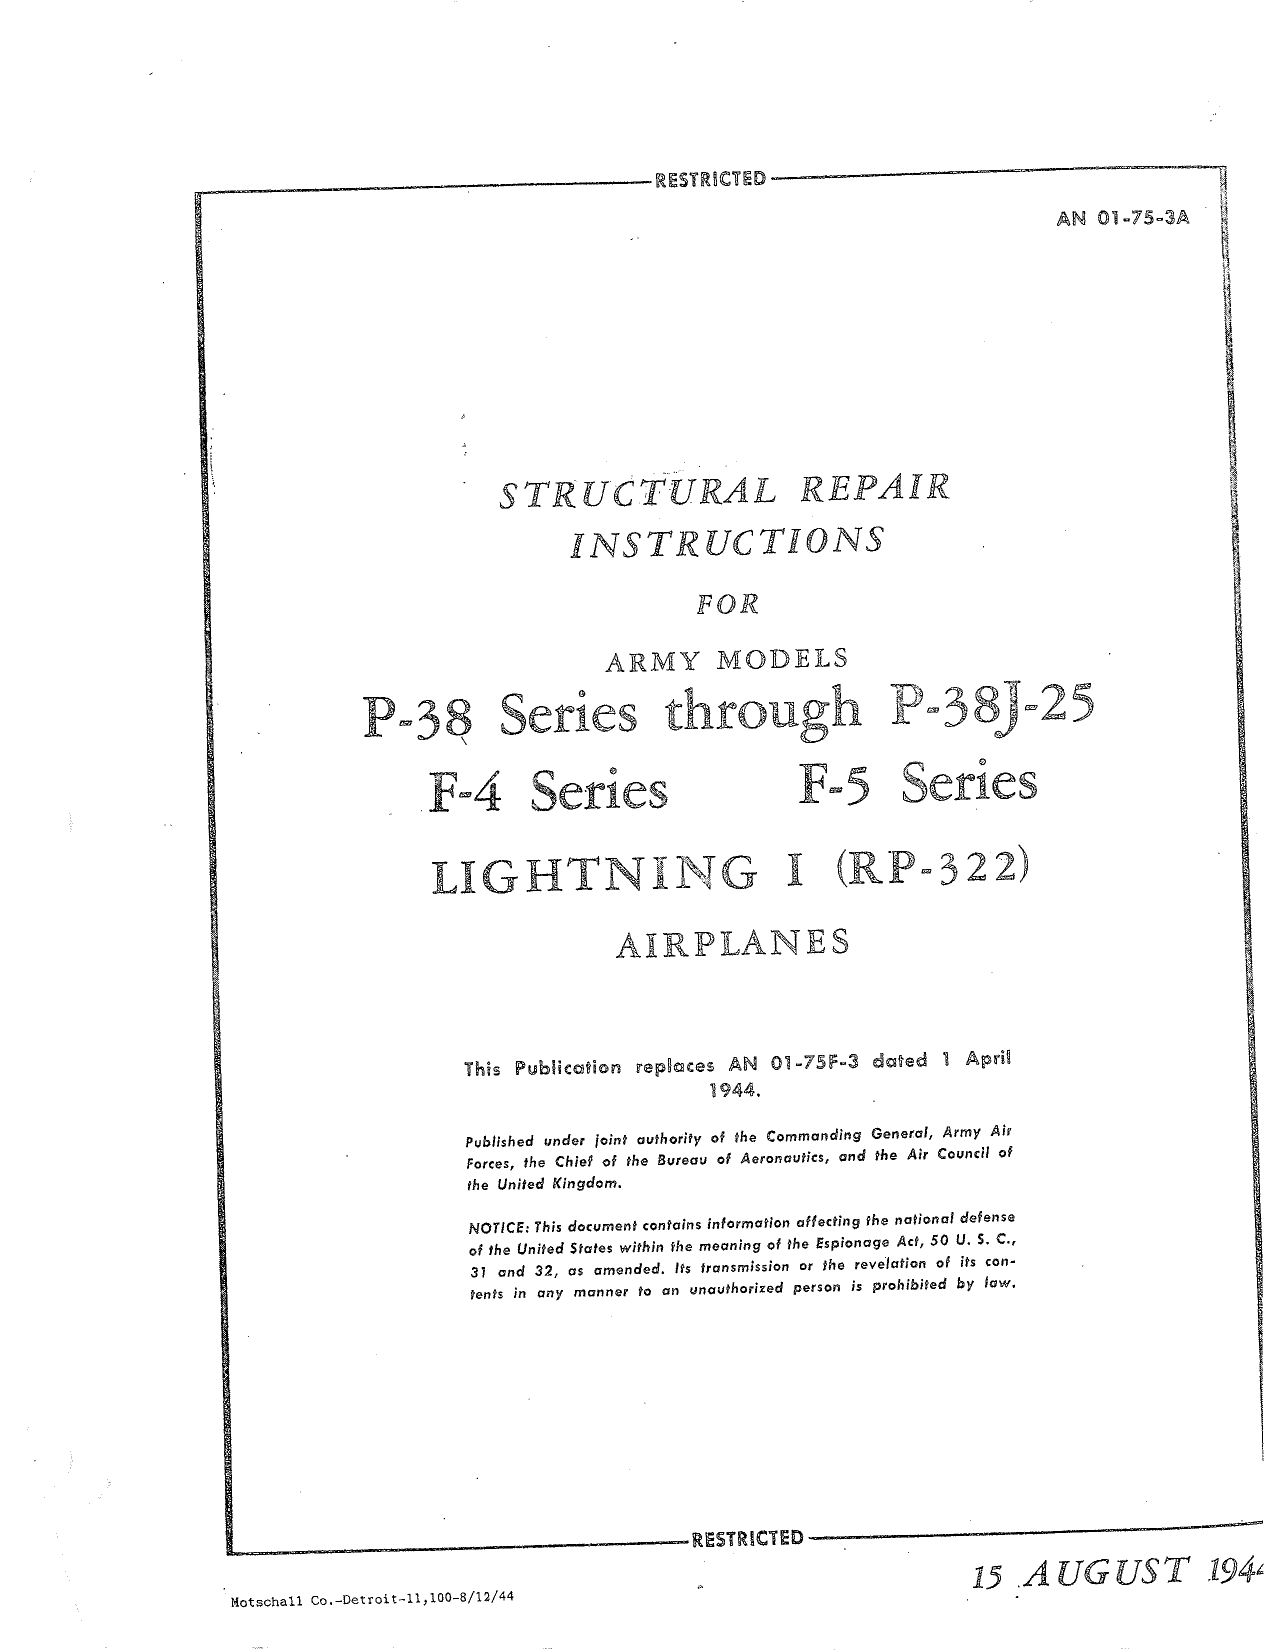 Sample page 1 from AirCorps Library document: Structural Repair Instructions - P-38